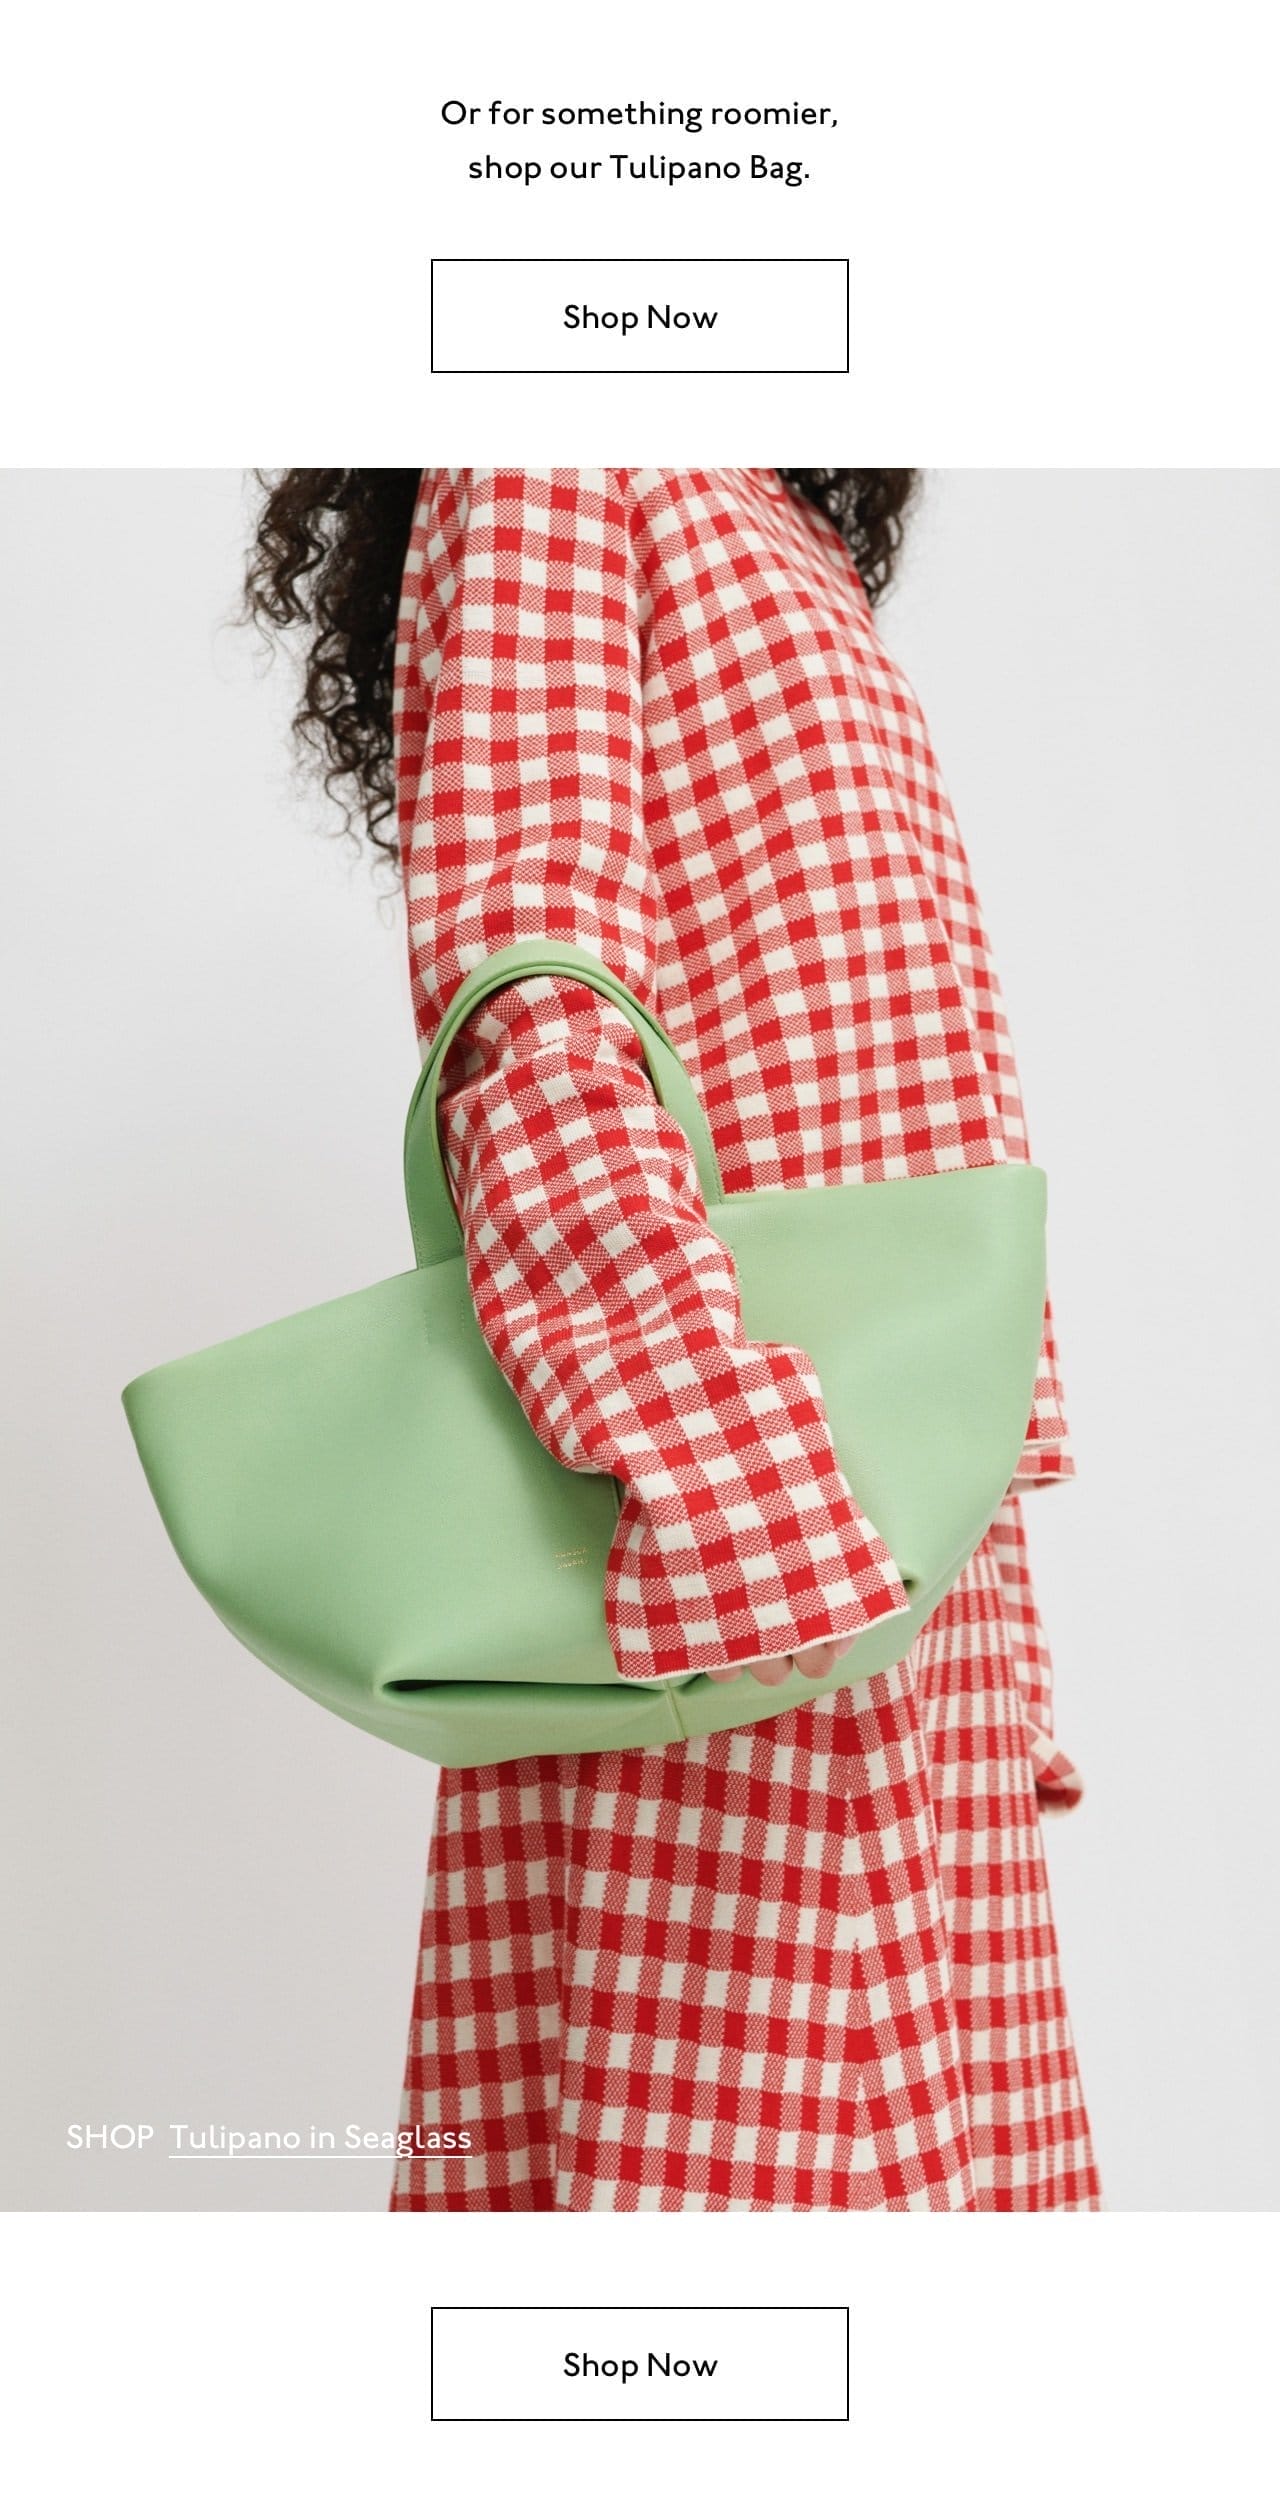 Or for something roomier, shop our Tulipano Bag in five seasonal colors. Pictured: Tulipano in Seaglass.